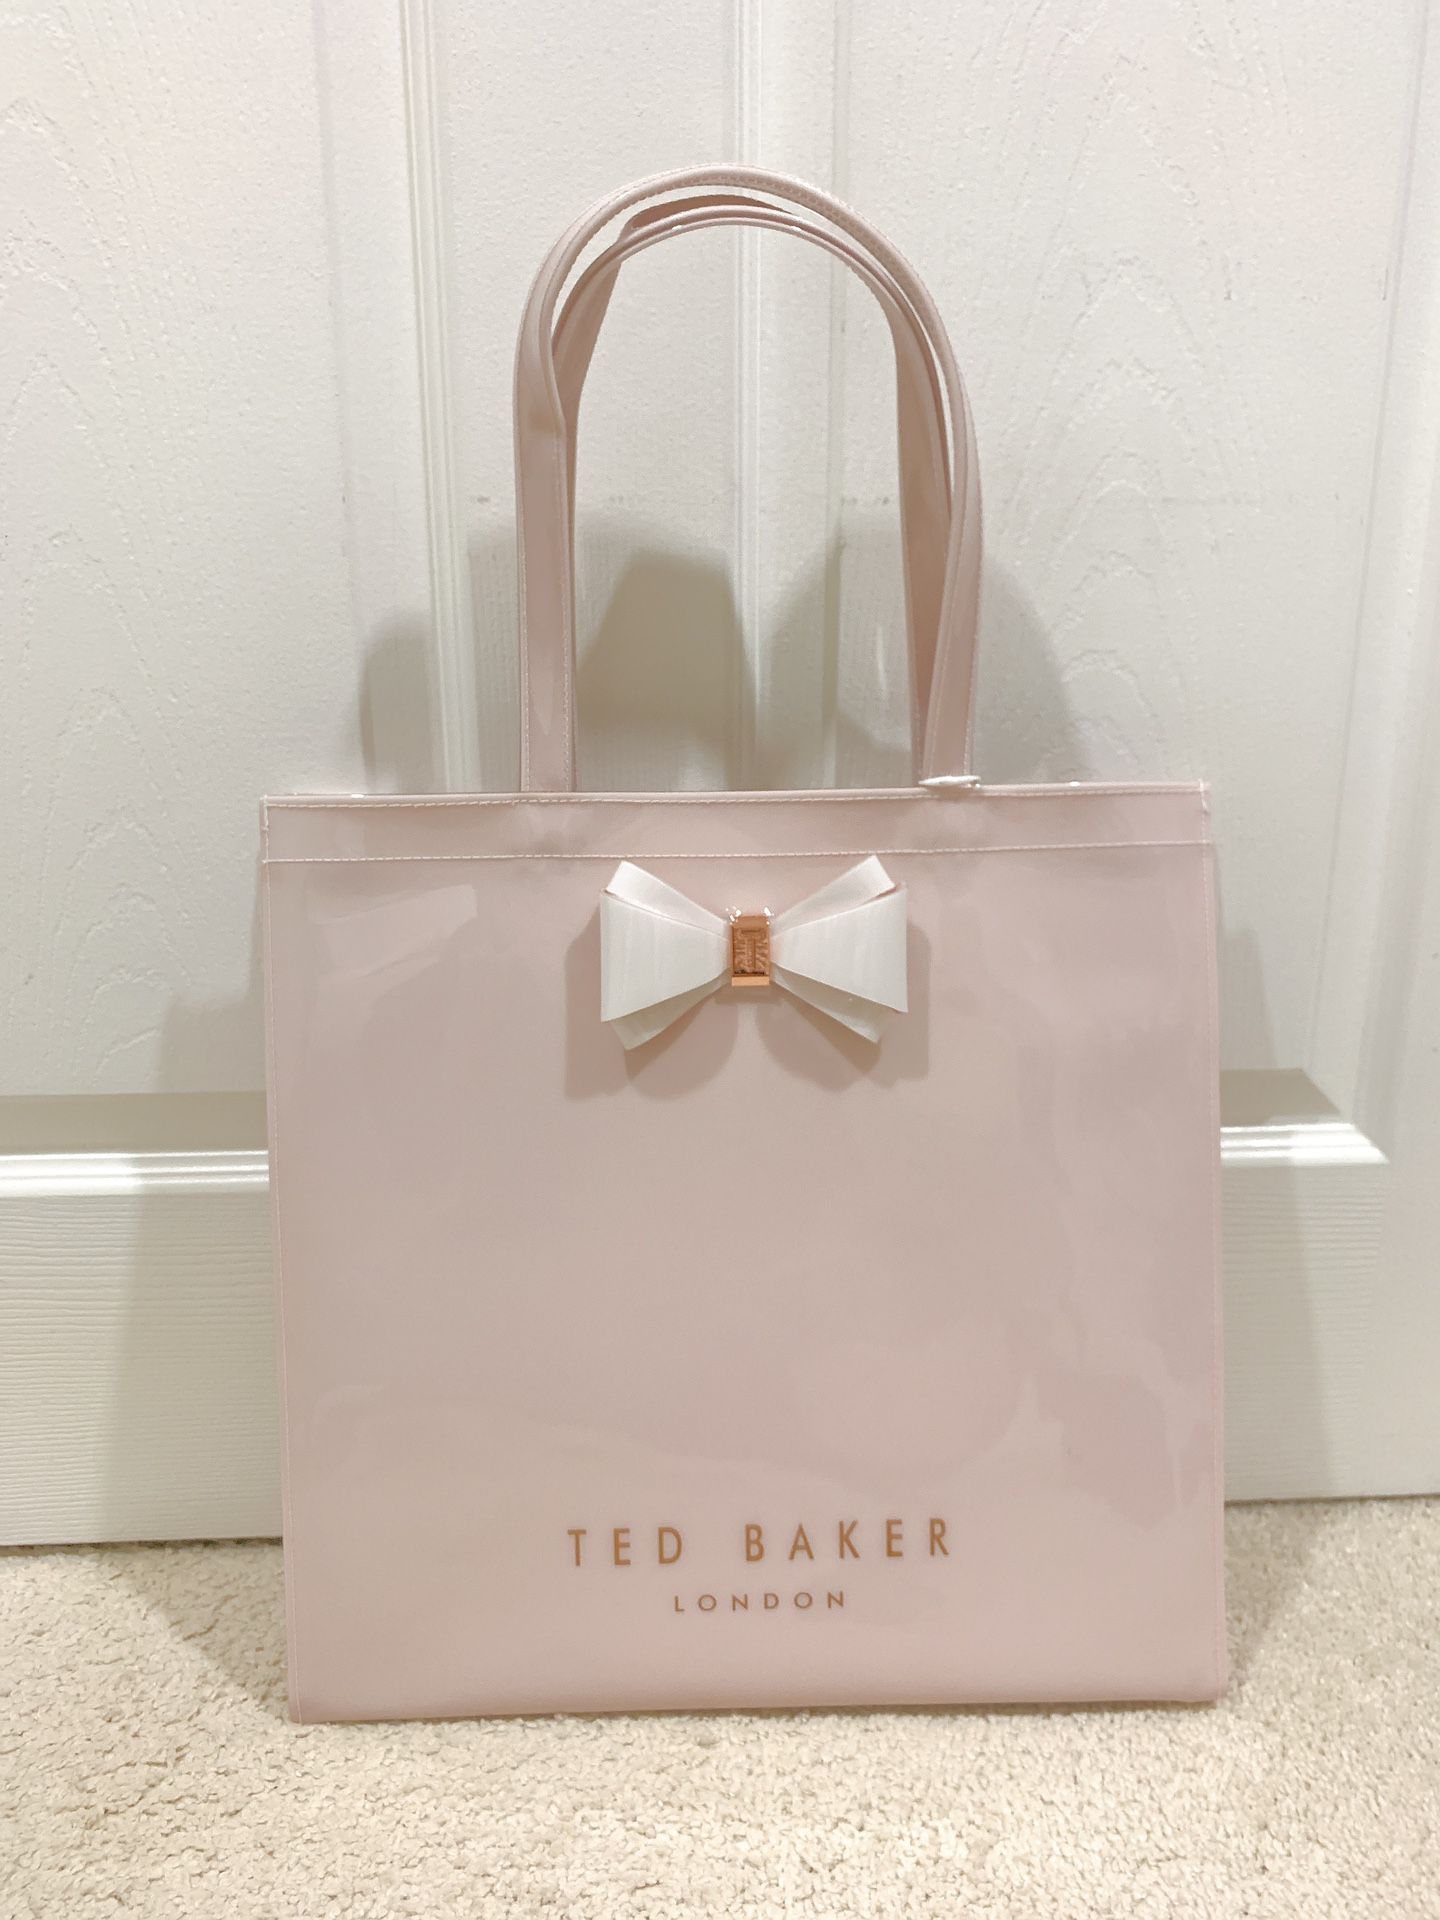 Brand new Ted Baker shopping bag tote in pink